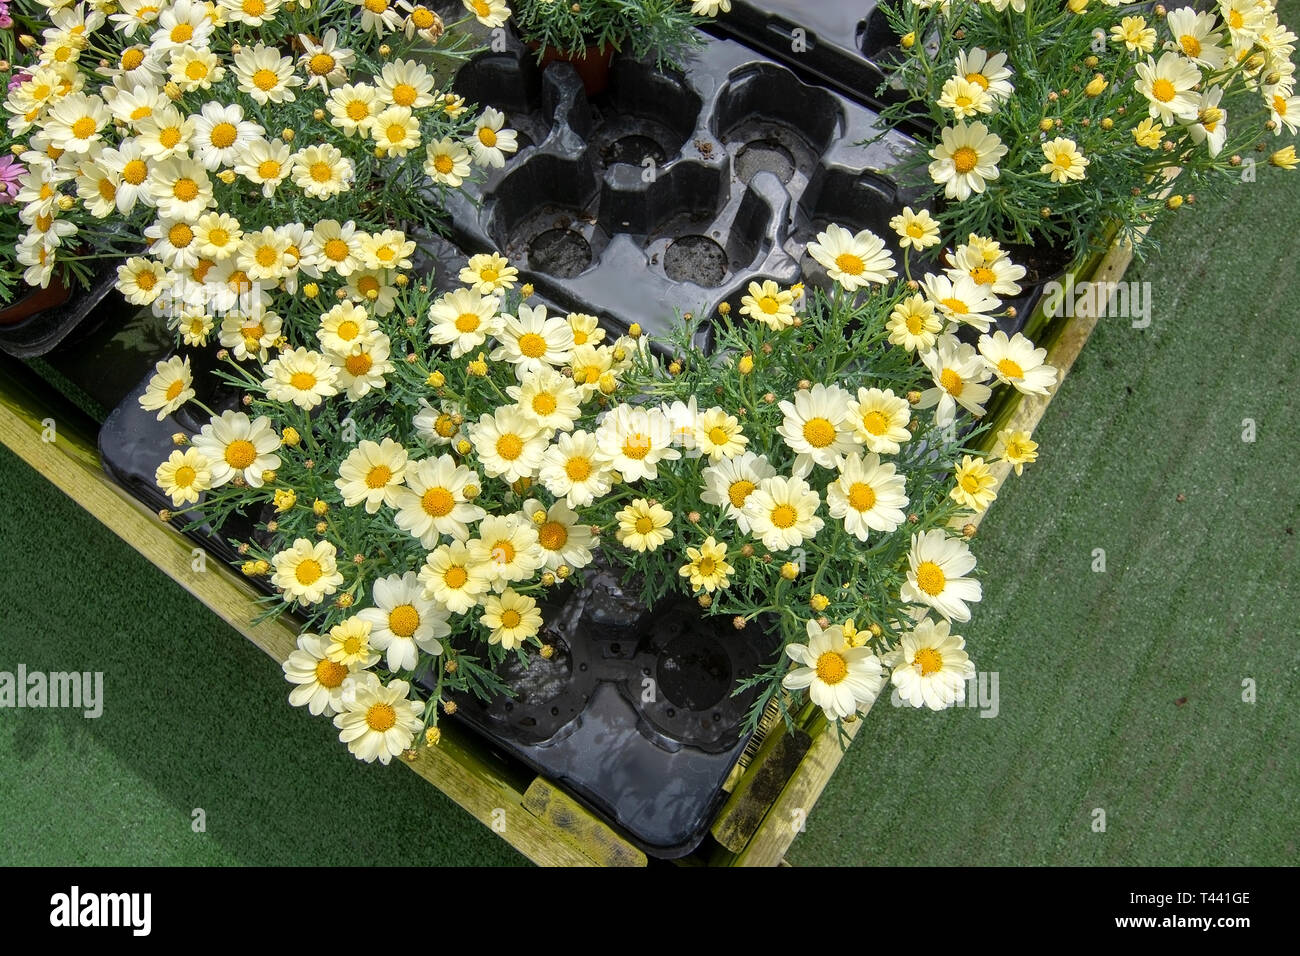 White daisy flowers on display in plastic pot wooden box. Spring garden series, Mallorca, Spain. Stock Photo